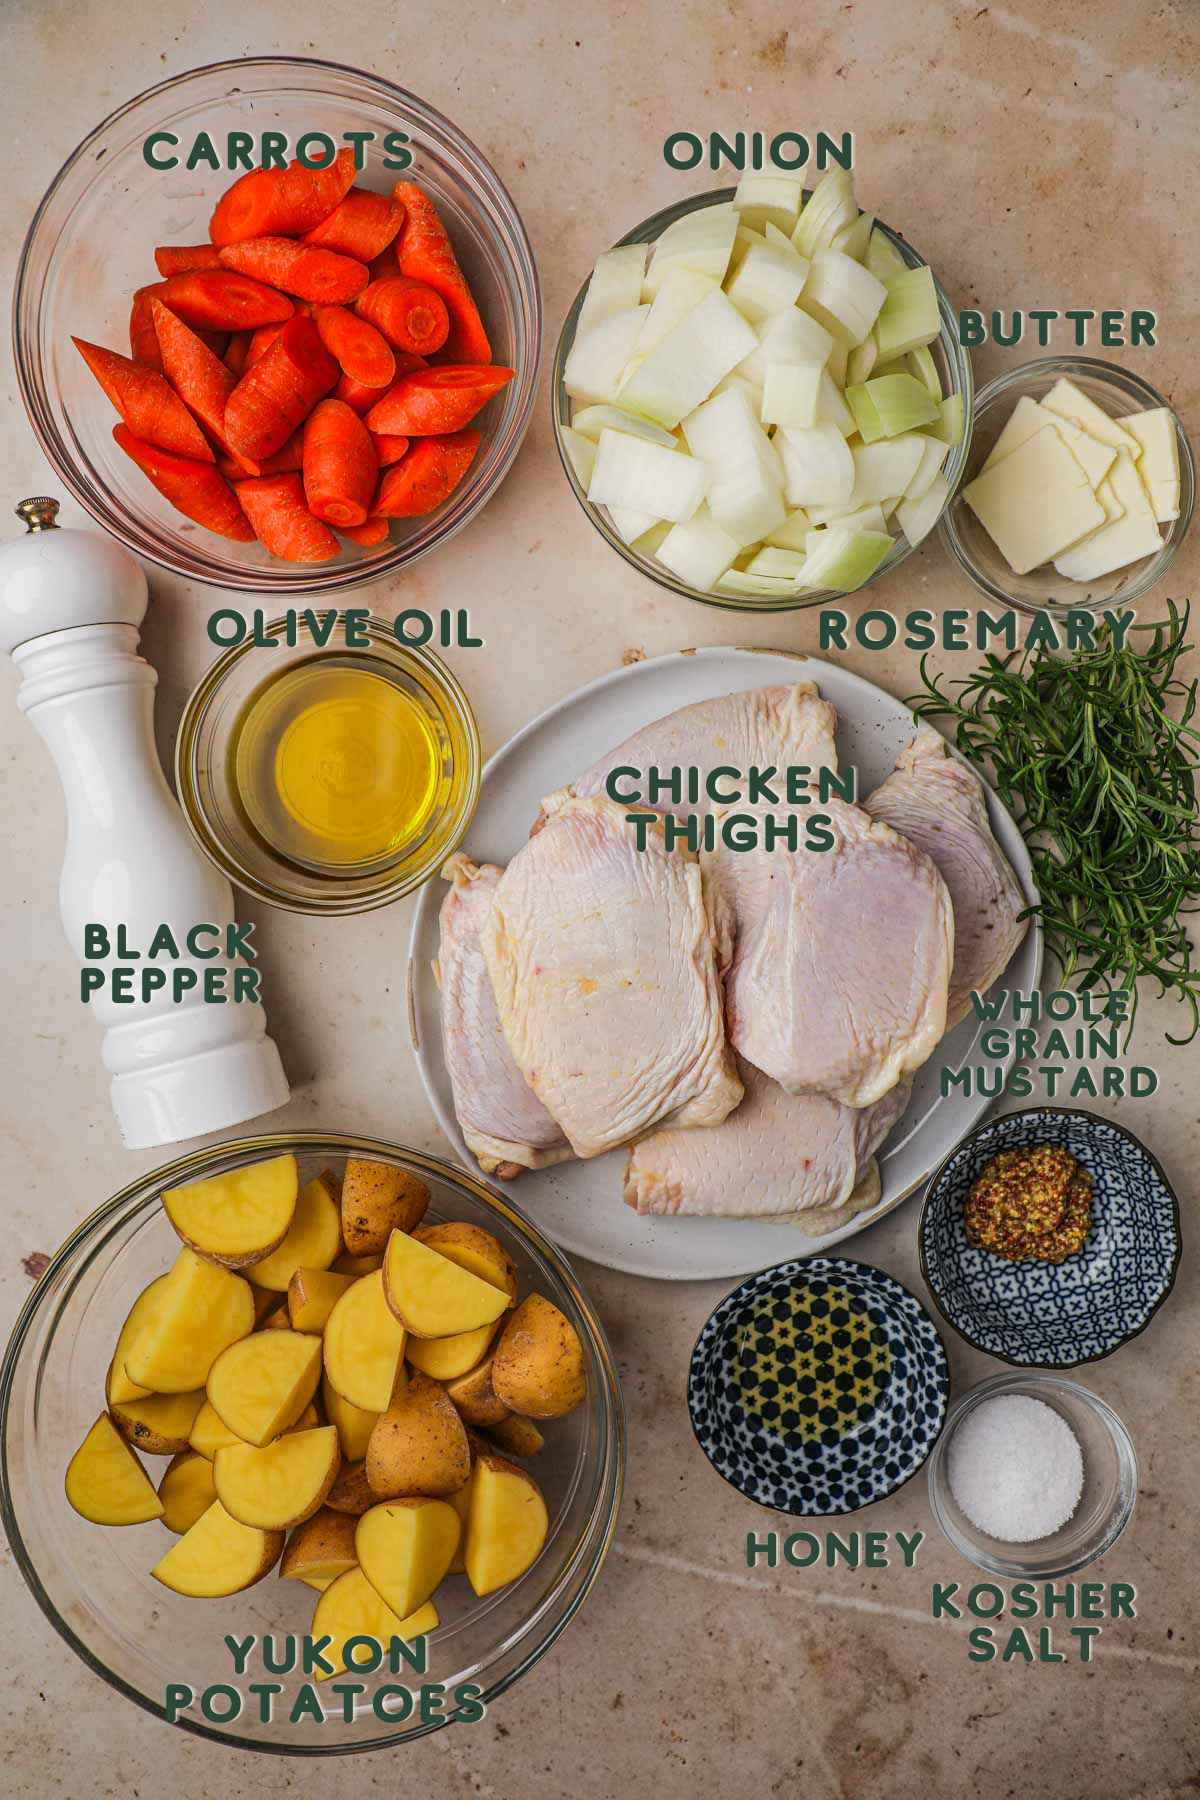 Ingredients for rosemary chicken thighs, chicken thighs, carrots, onion, potatoes, olive oil, rosemary, mustard, honey, salt, pepper.